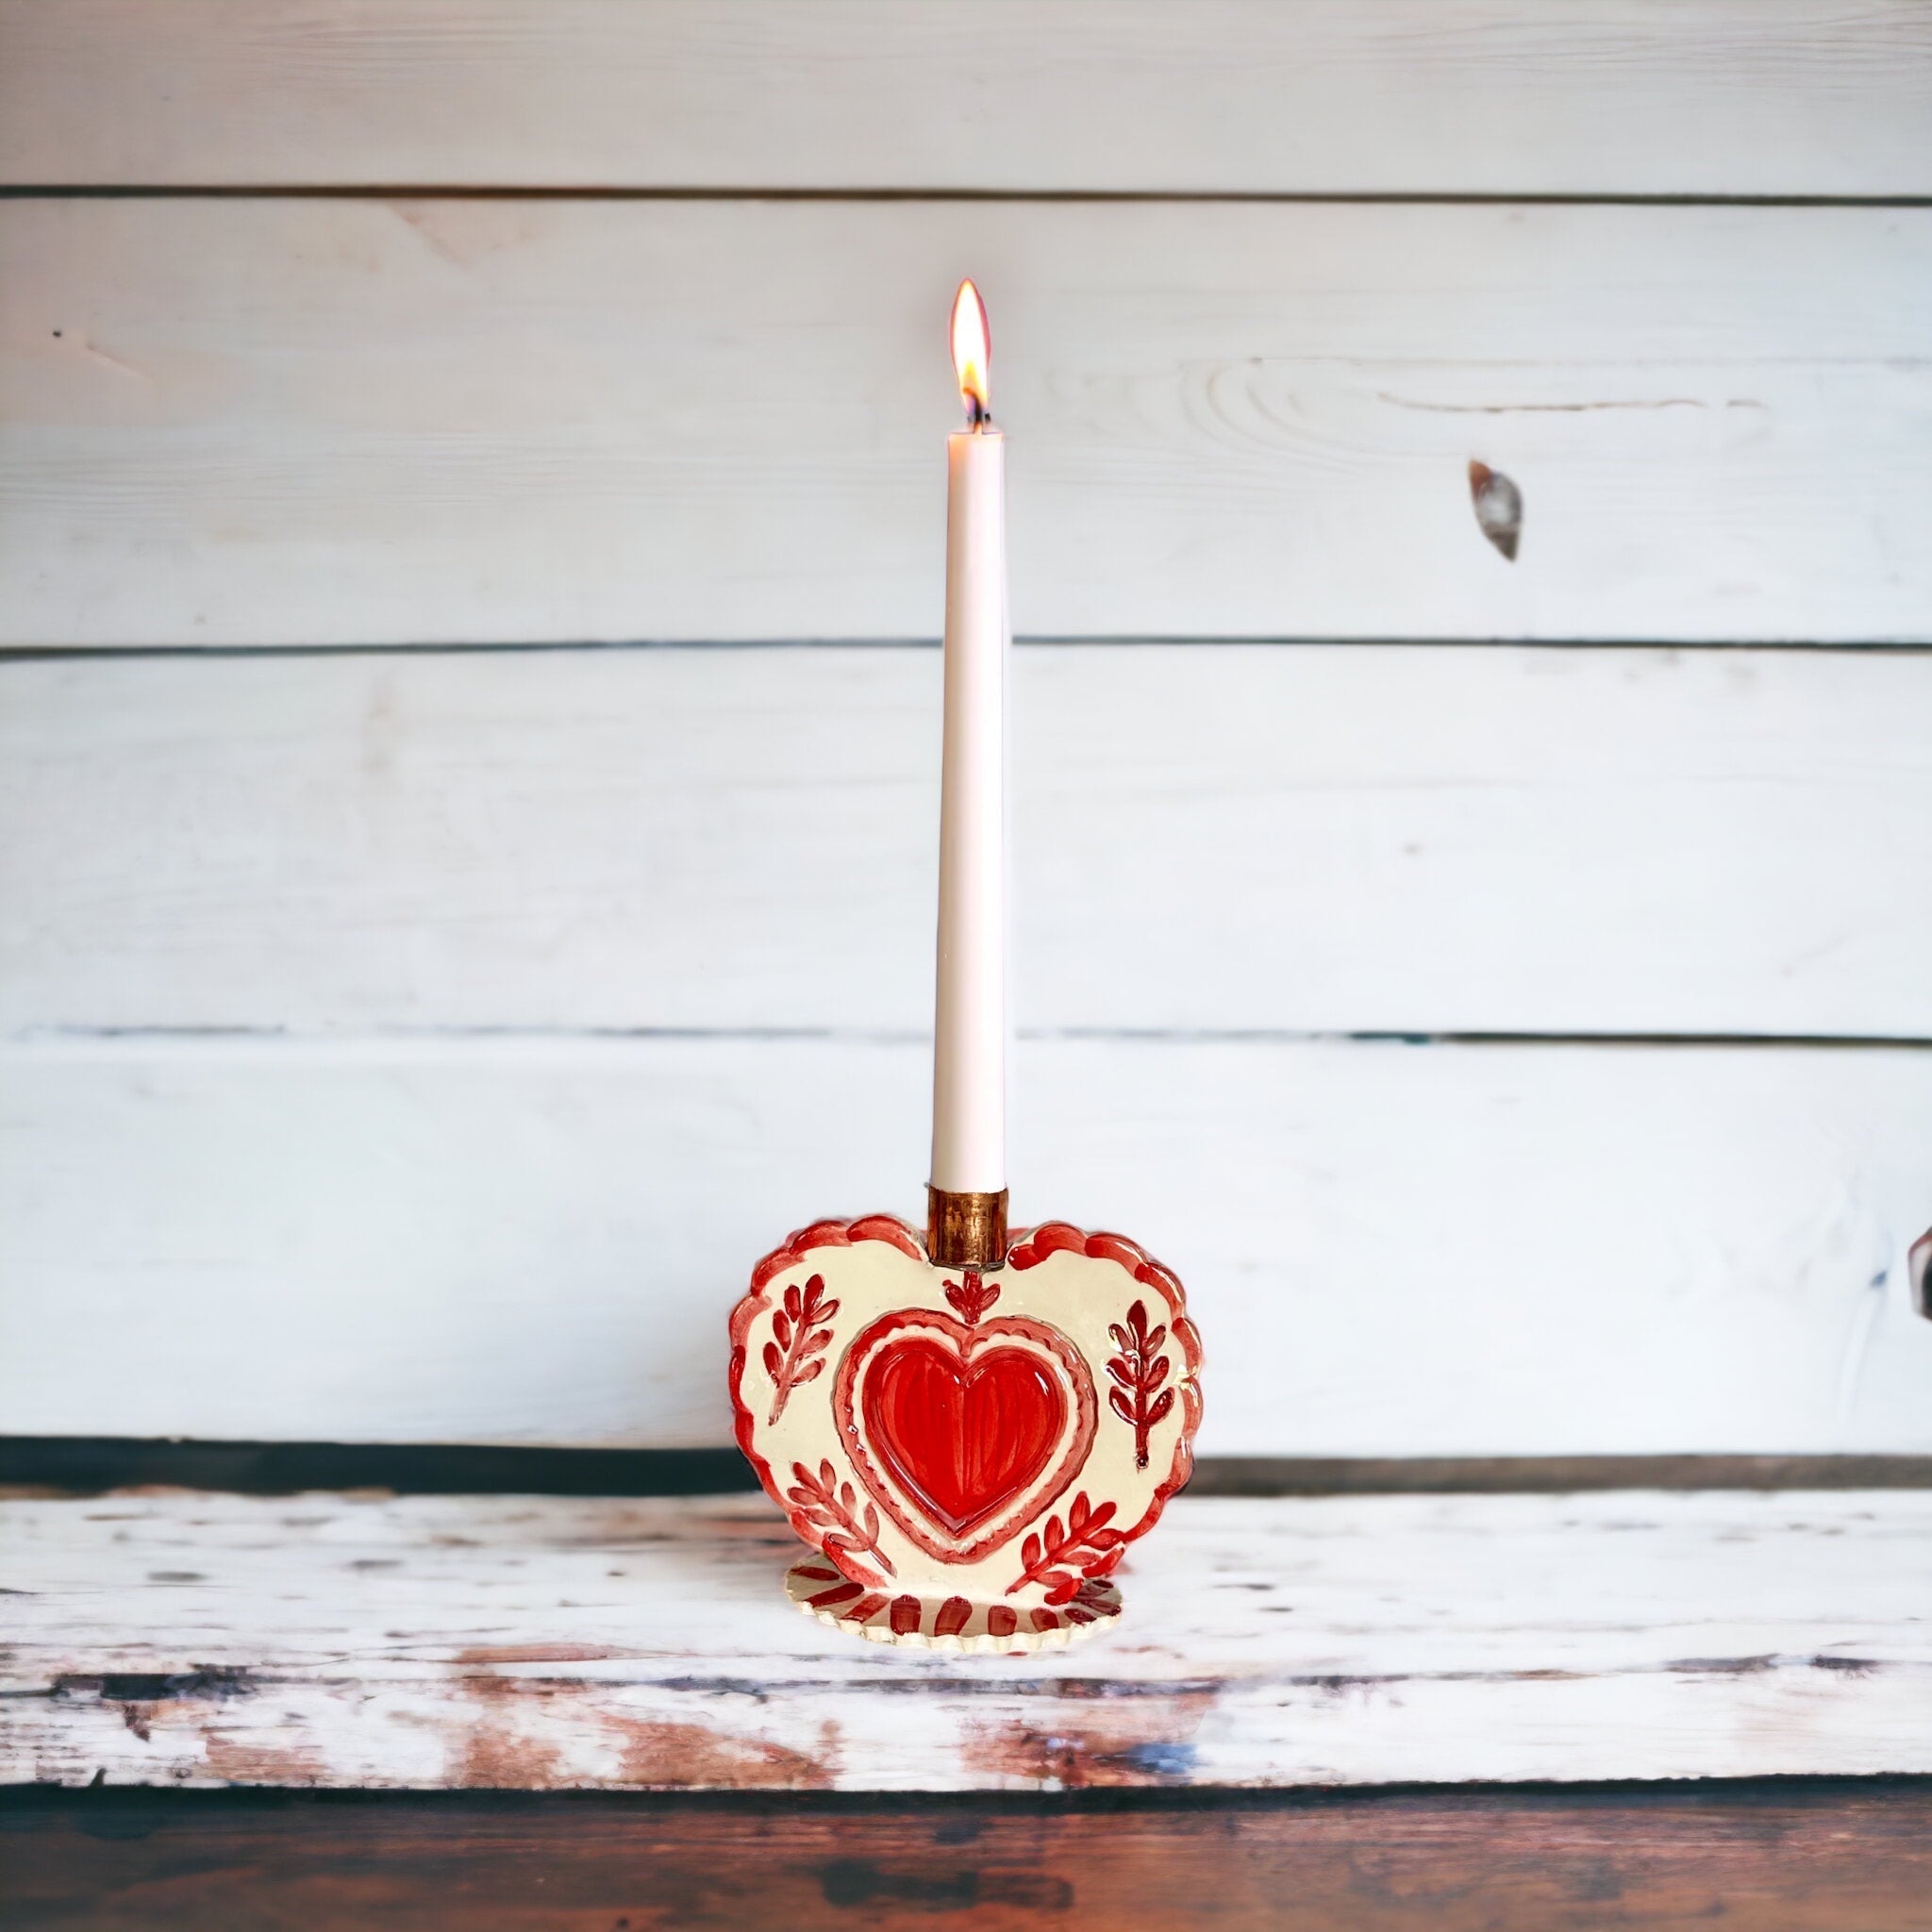 House Candlestick Holder - Premium Cake Topper from Tricia Lowenfield Design 